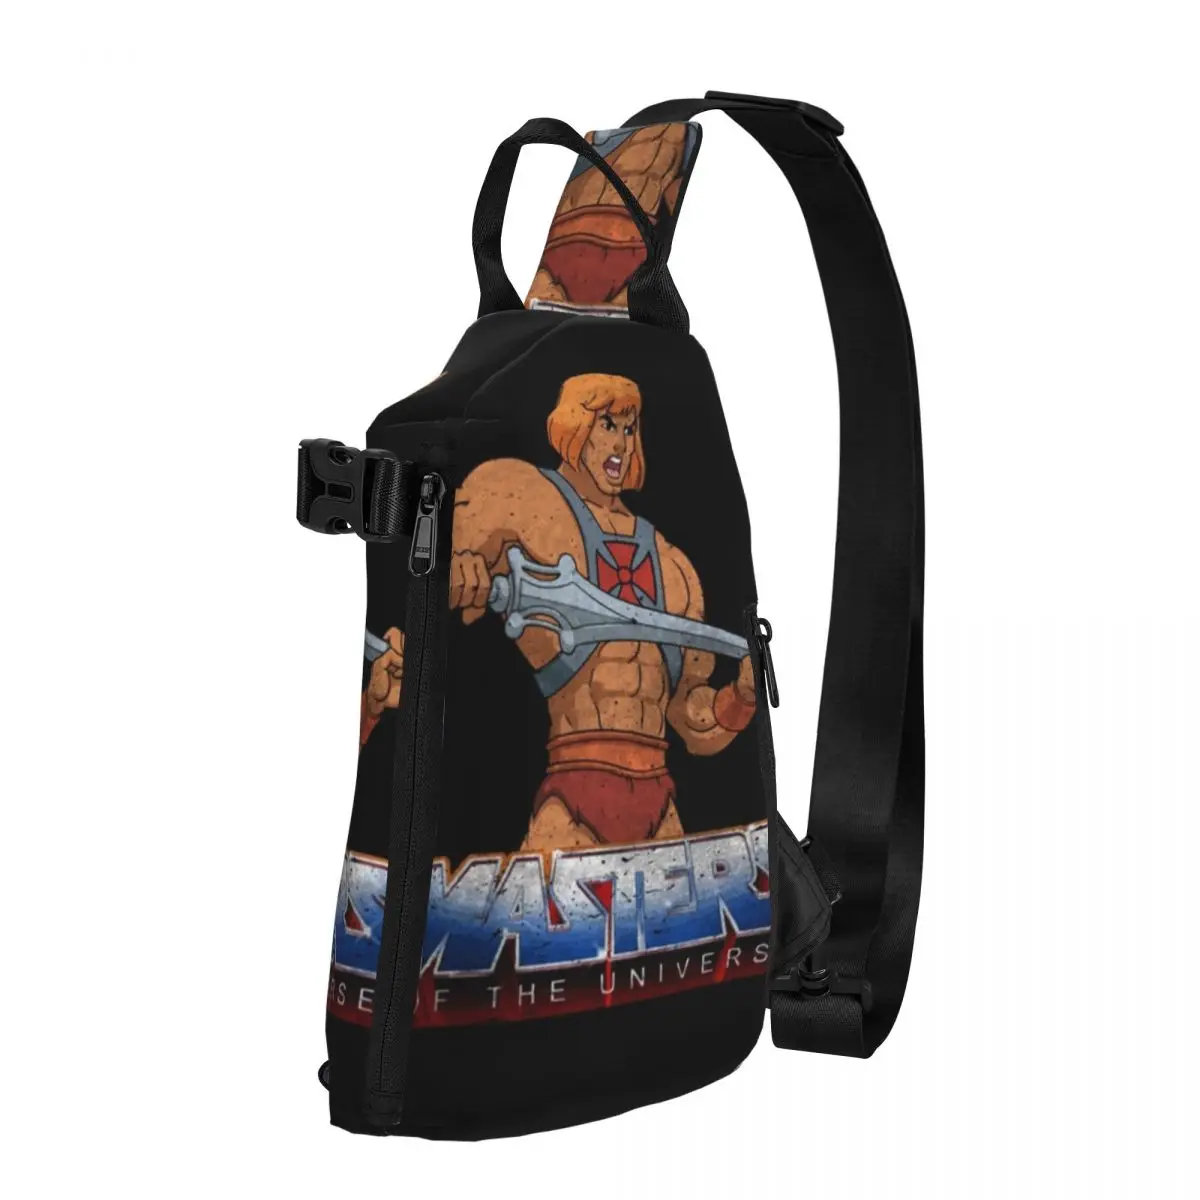 

Masters Of The Universe Shoulder Bags He Man Stylish Chest Bag Unisex Motorcycle Motorcycle Sling Bag Business Crossbody Bags